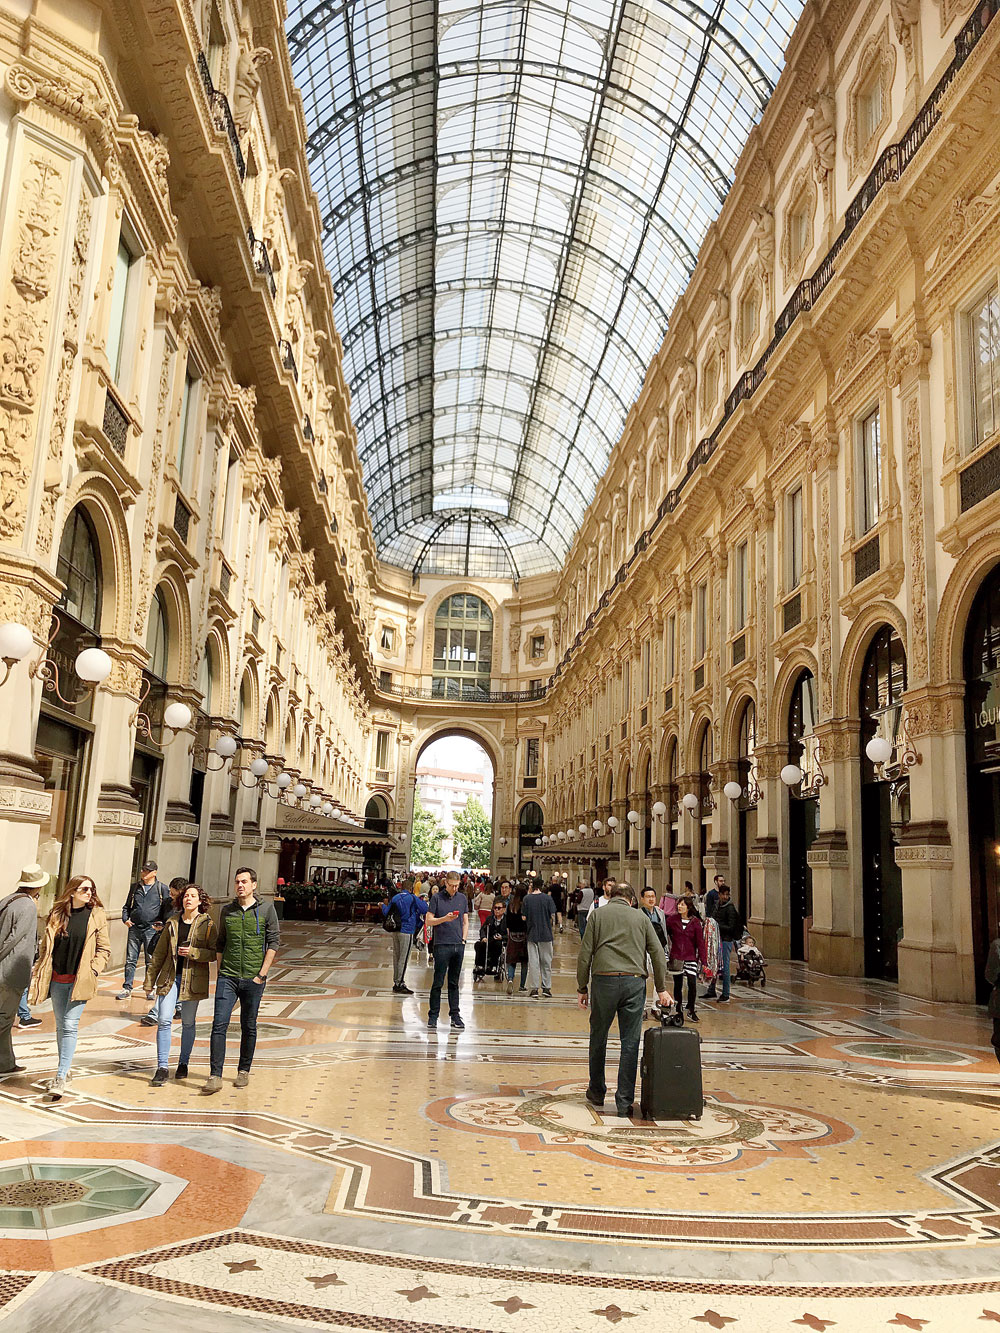  Galleria Vittorio Emanuele II is gorgeous and Italy’s oldest active shopping mall